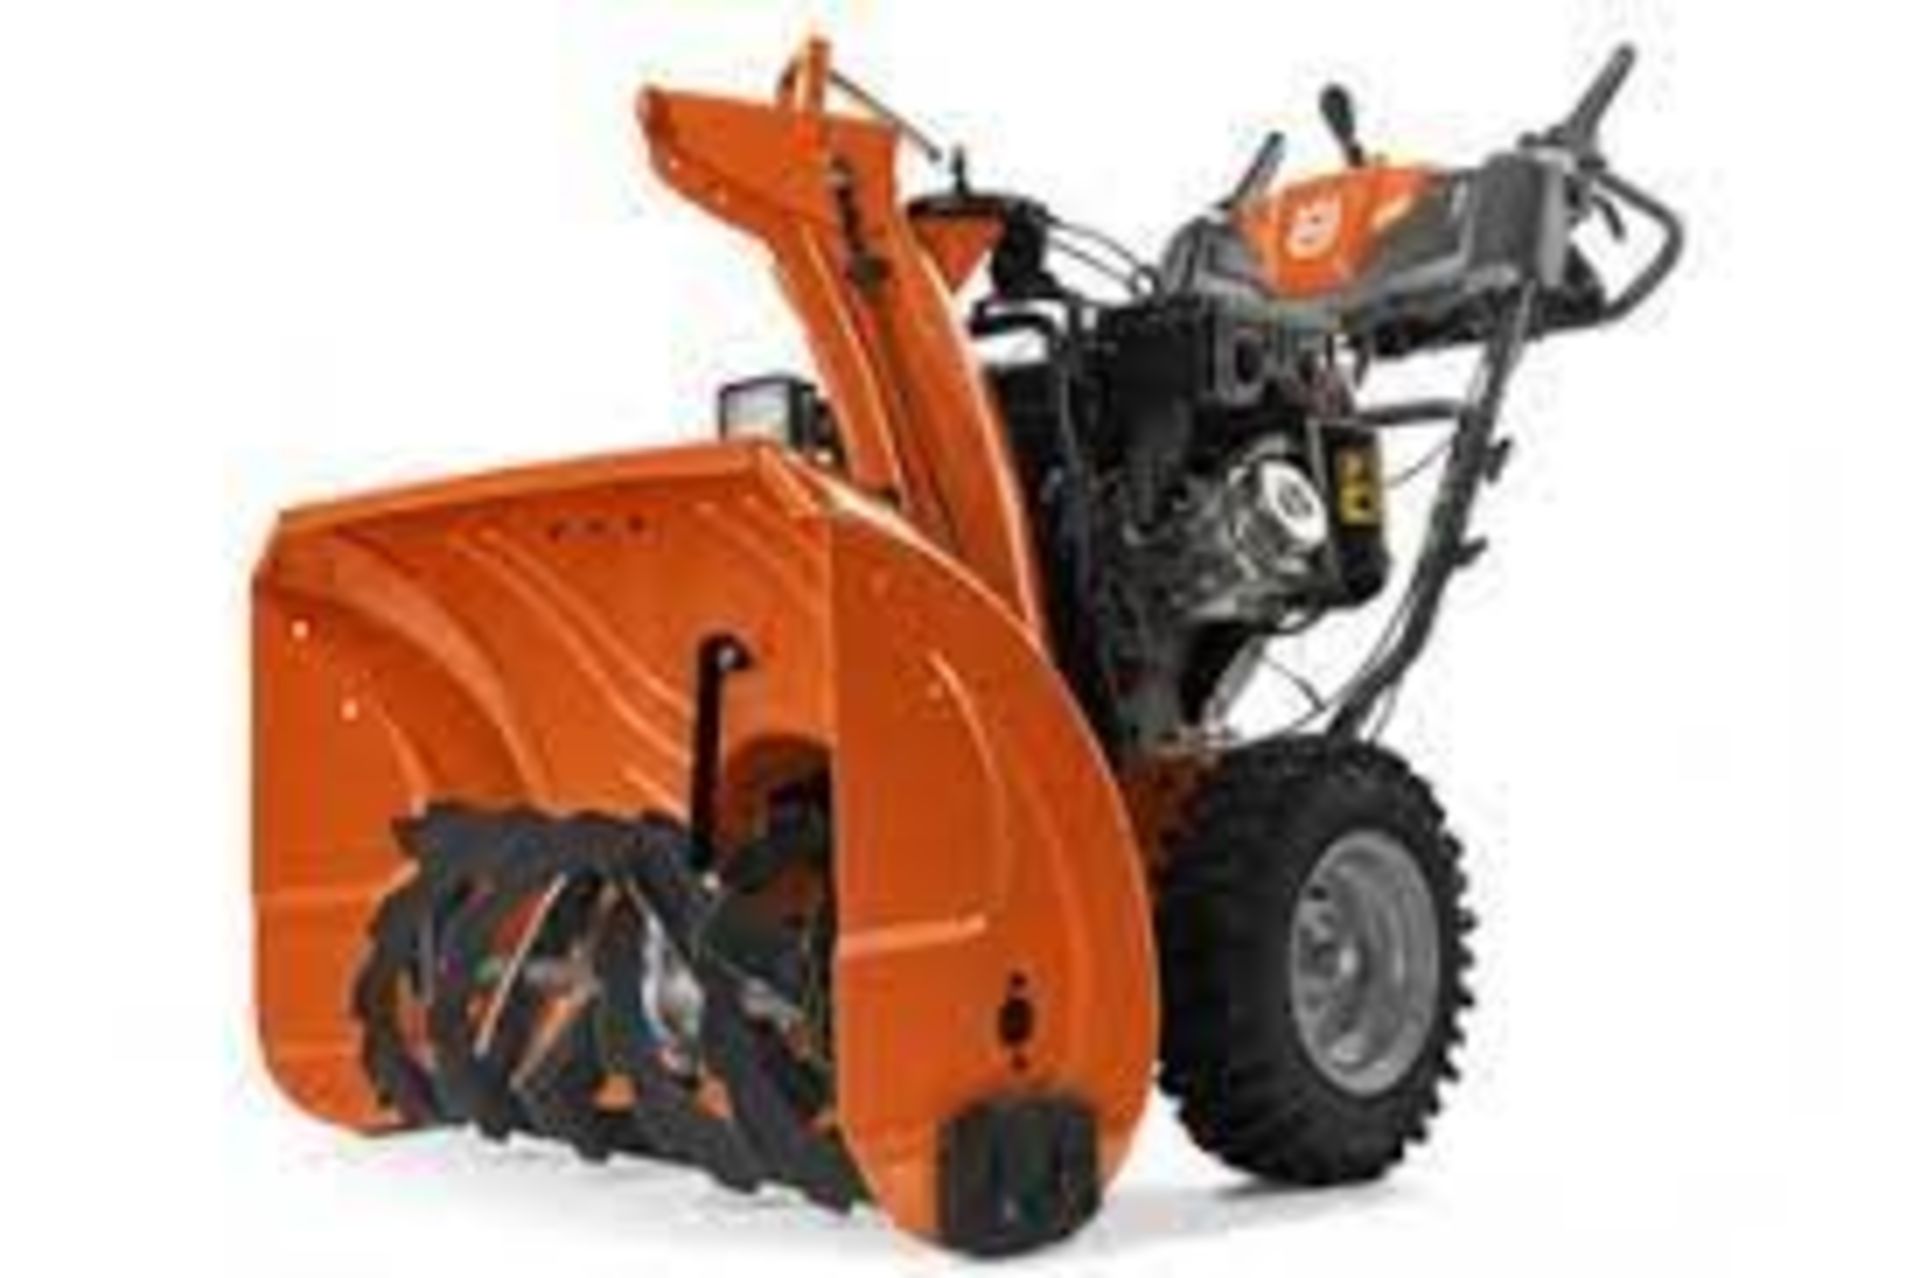 Husqvarna ST 230P Self Propelled Snow Blower - Approx. MSRP $1299 - Image 3 of 5